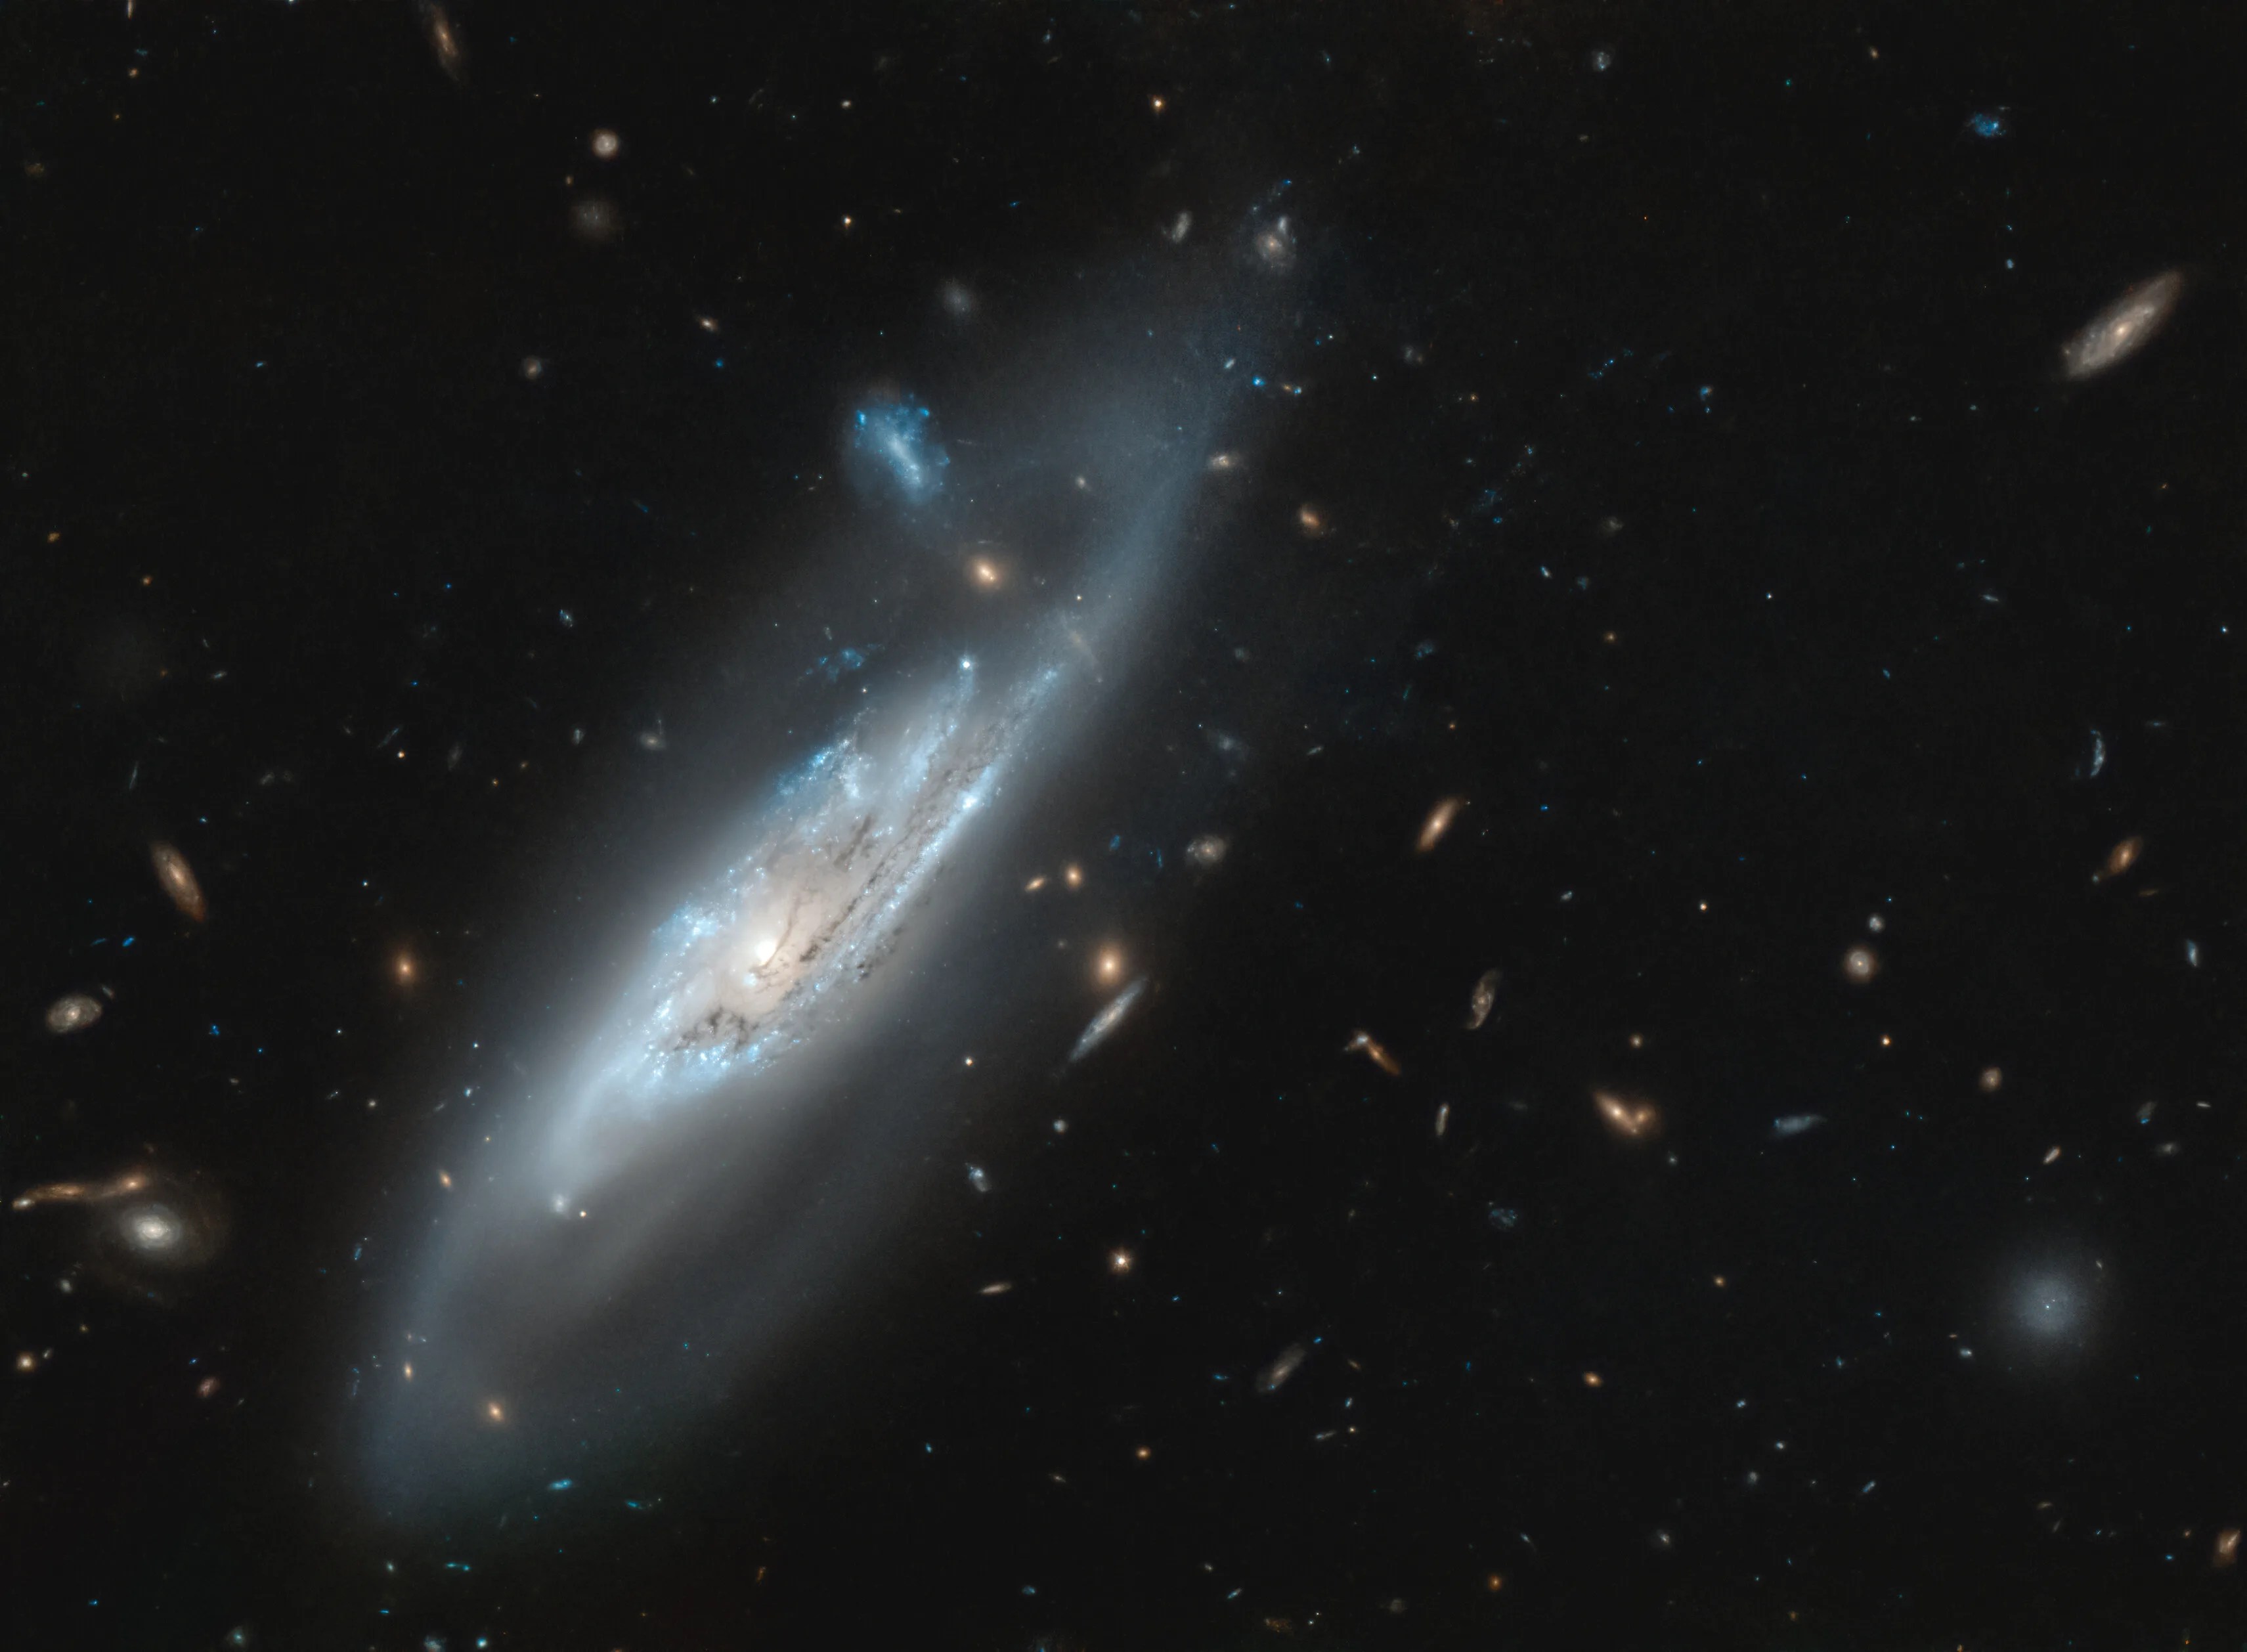 Bright, vaguely bluish, spiral galaxy ngc 4848 against black backdrop of space